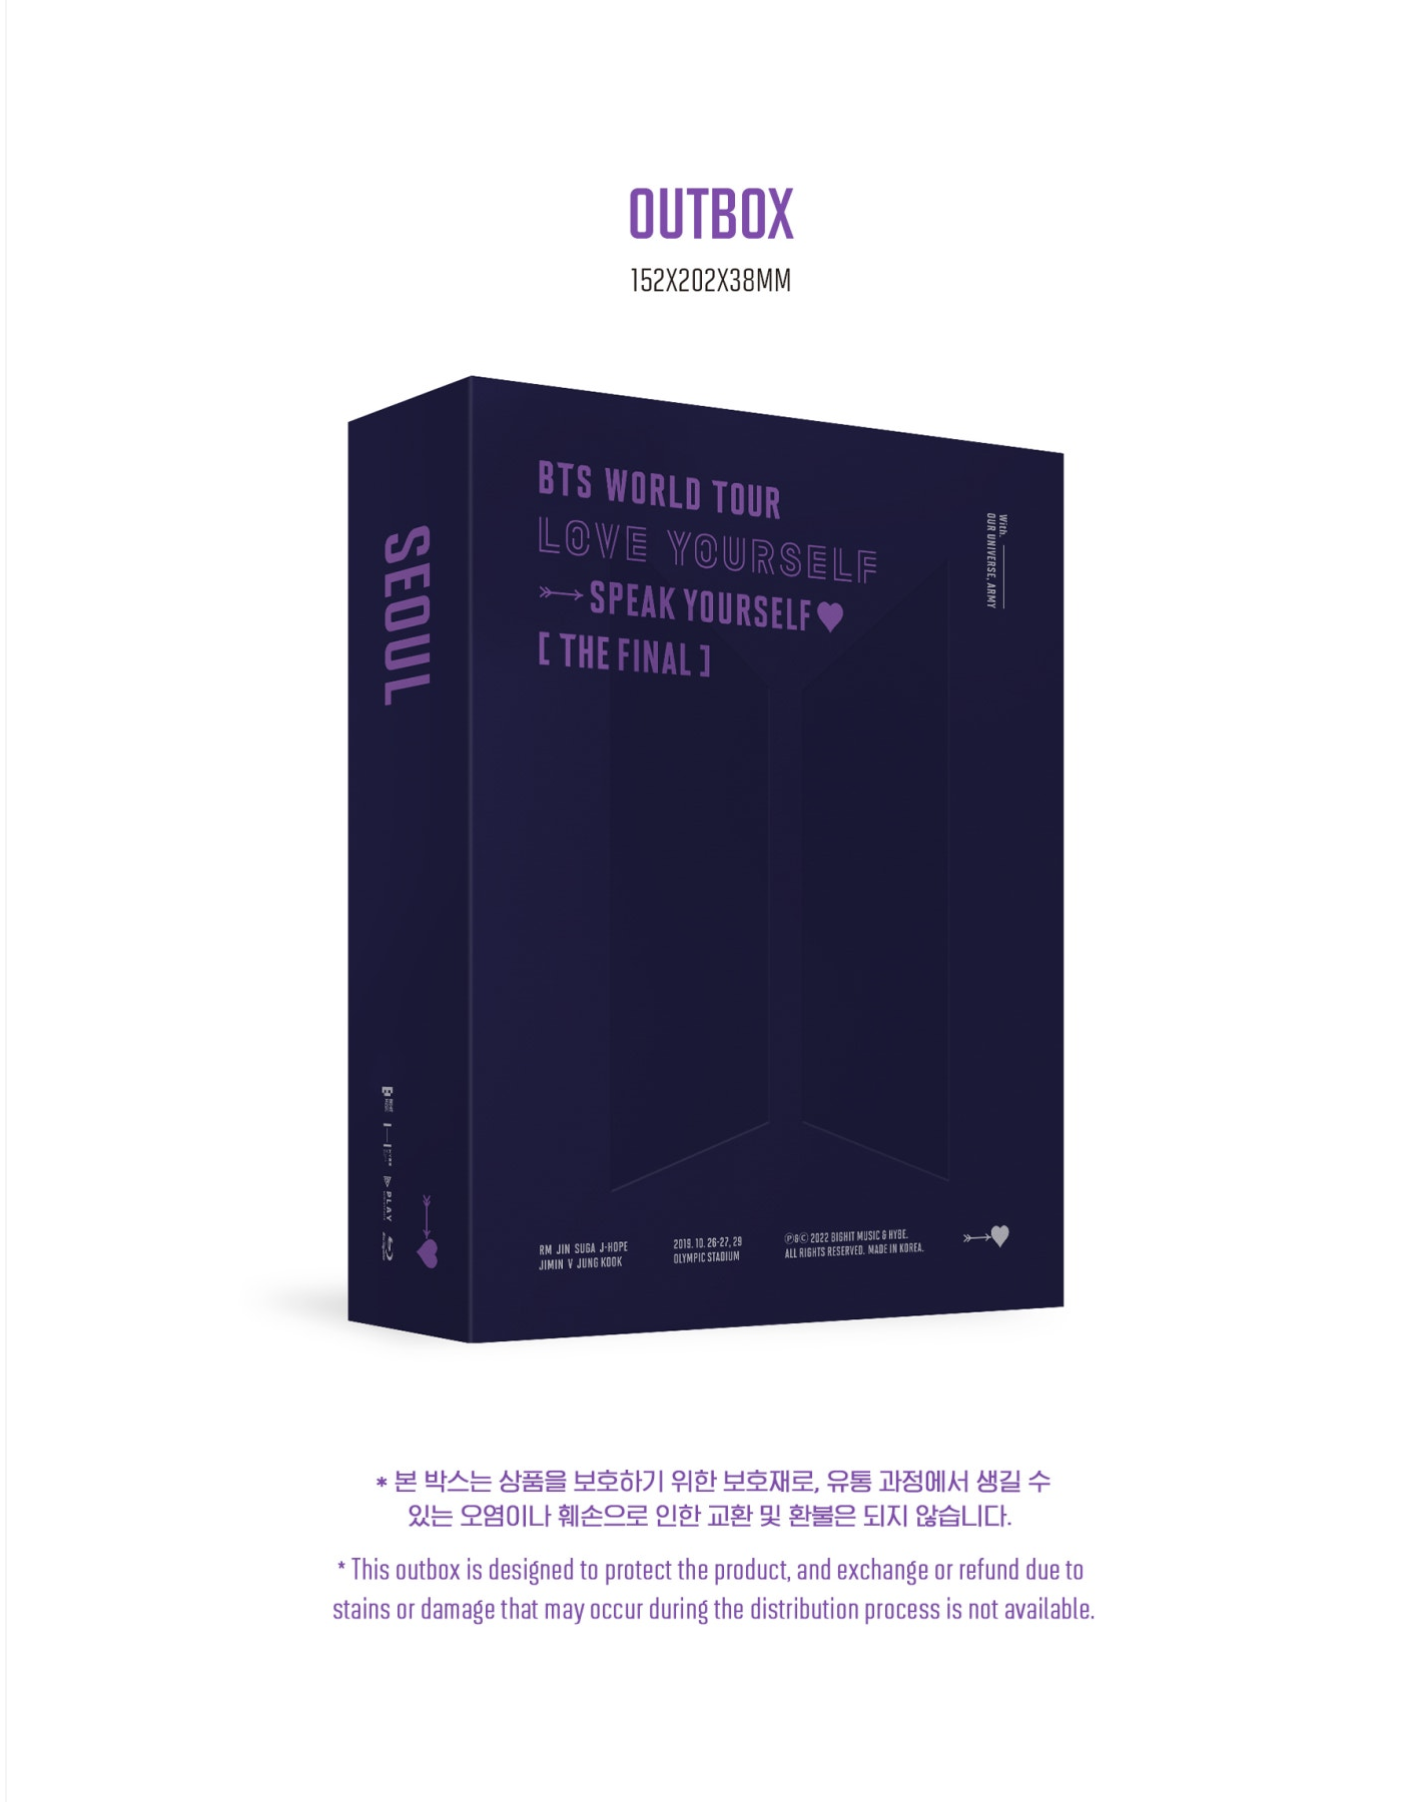 BLU-RAY] LOVE YOURSELF : SPEAK YOURSELF' [THE FINAL] — US BTS ARMY